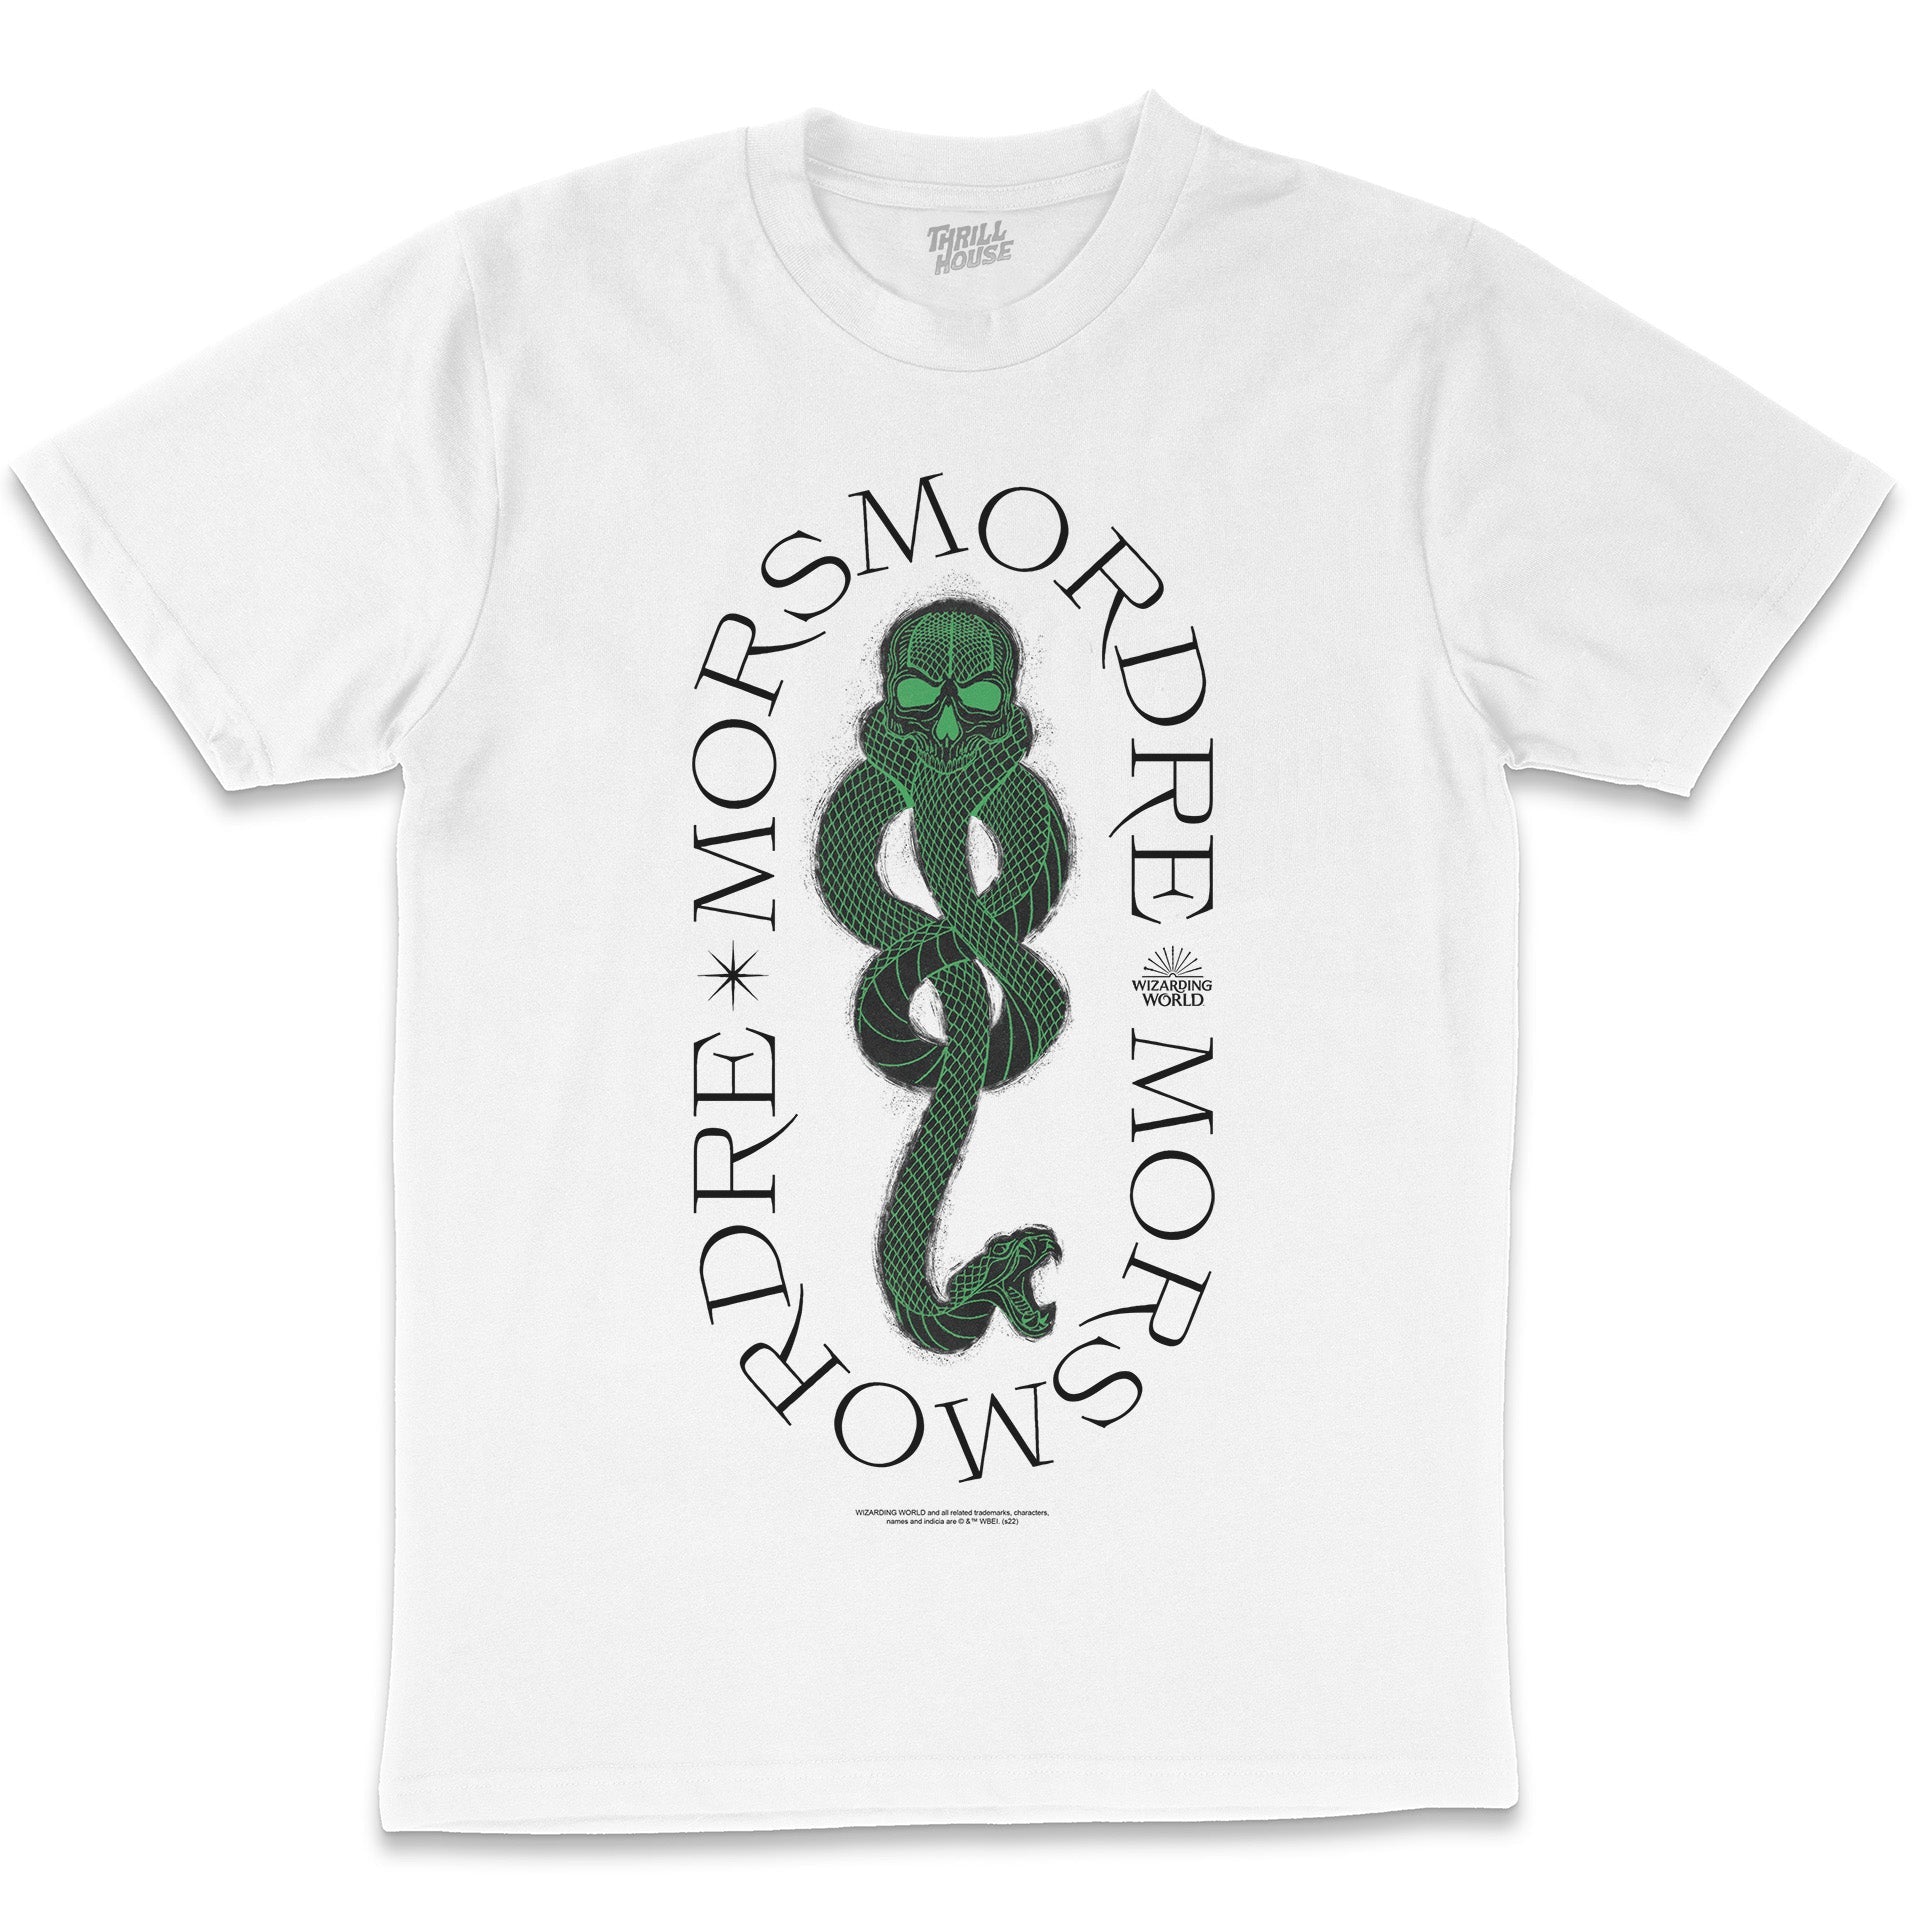 Harry Potter Death Eater Symbol Wizard World Slytherin Voldemort Officially Licensed Cotton T-Shirt